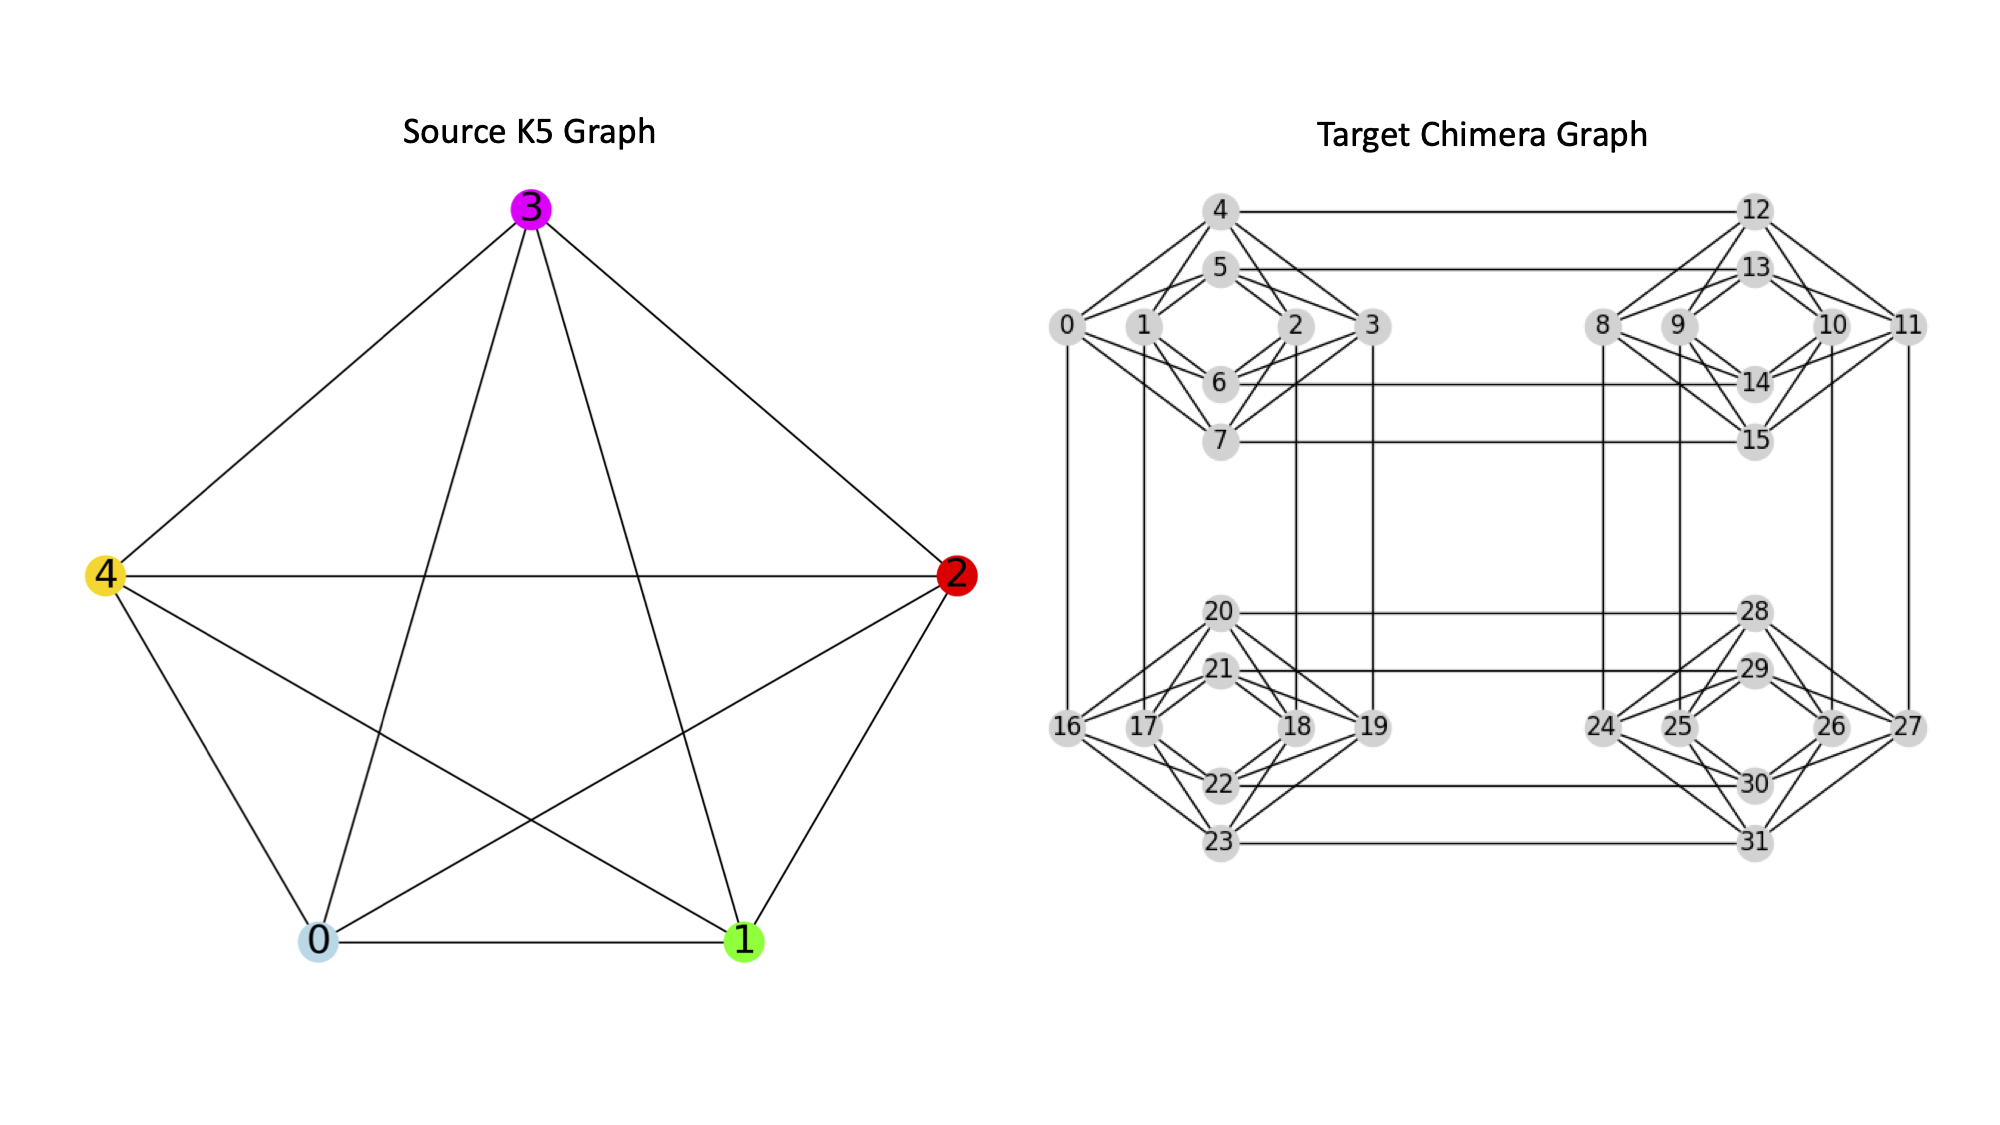 Source K5 graph and target Chimera graph